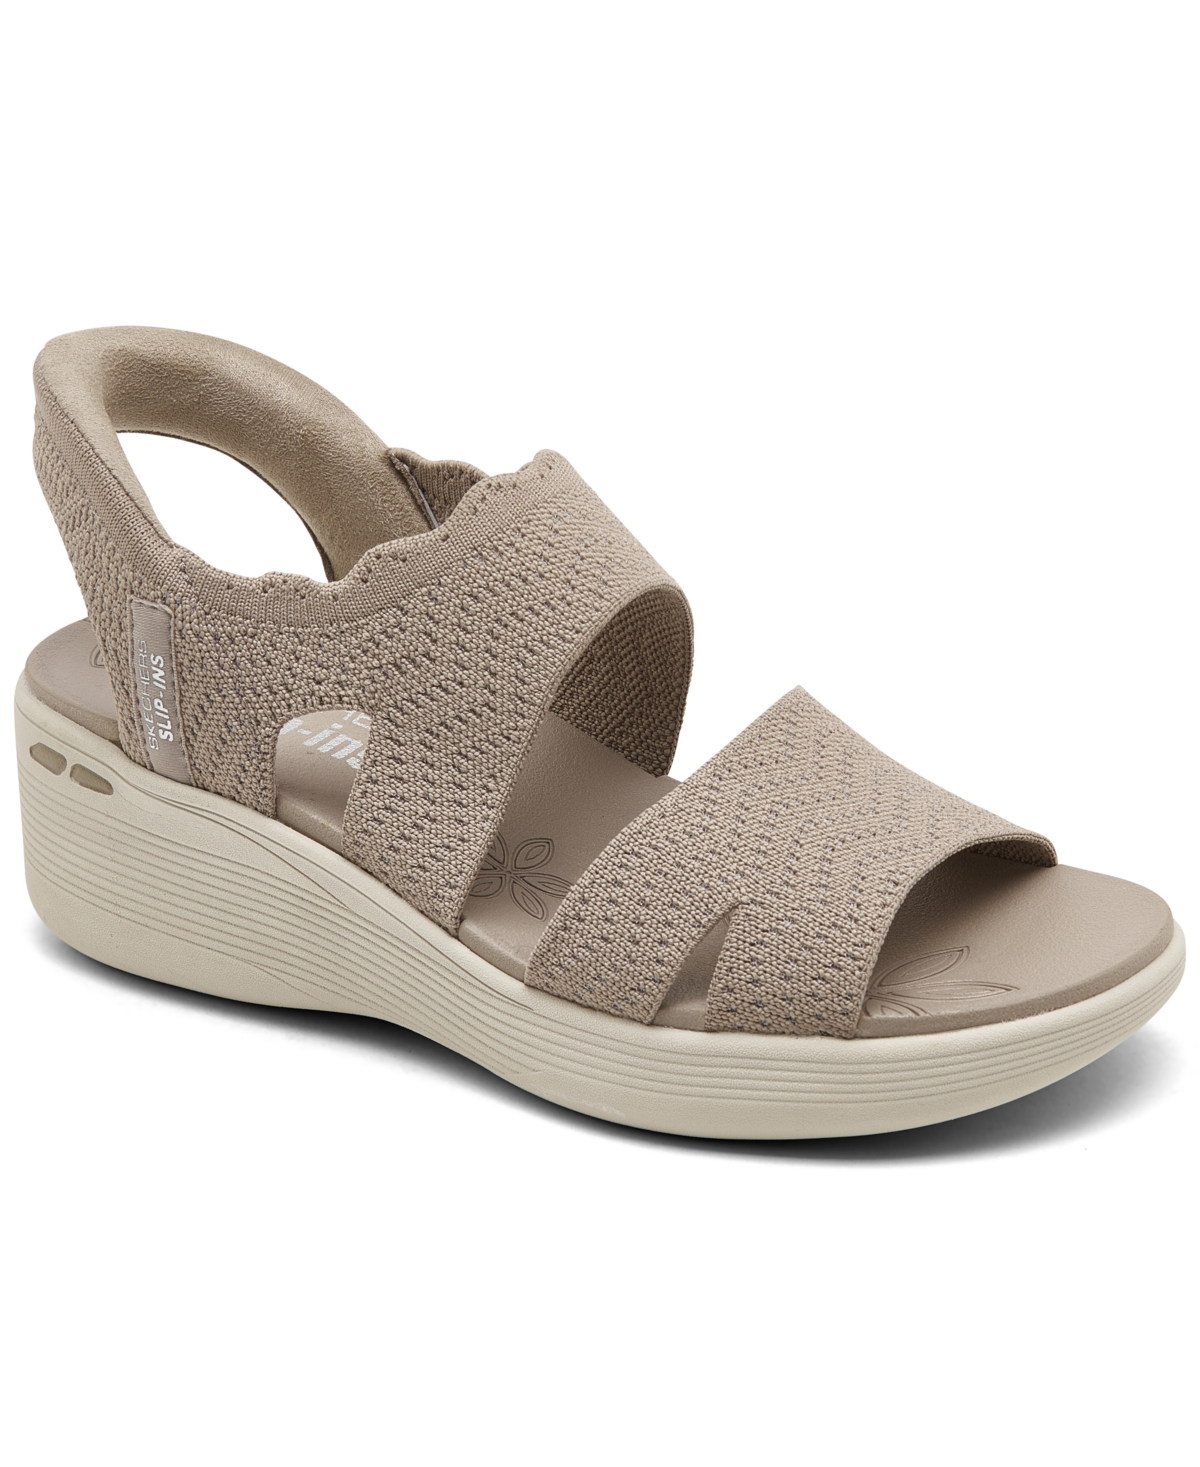 Women's Slip-Ins: Pier-Lite - Slip On By Walking Sandals from Finish Line - Taupe